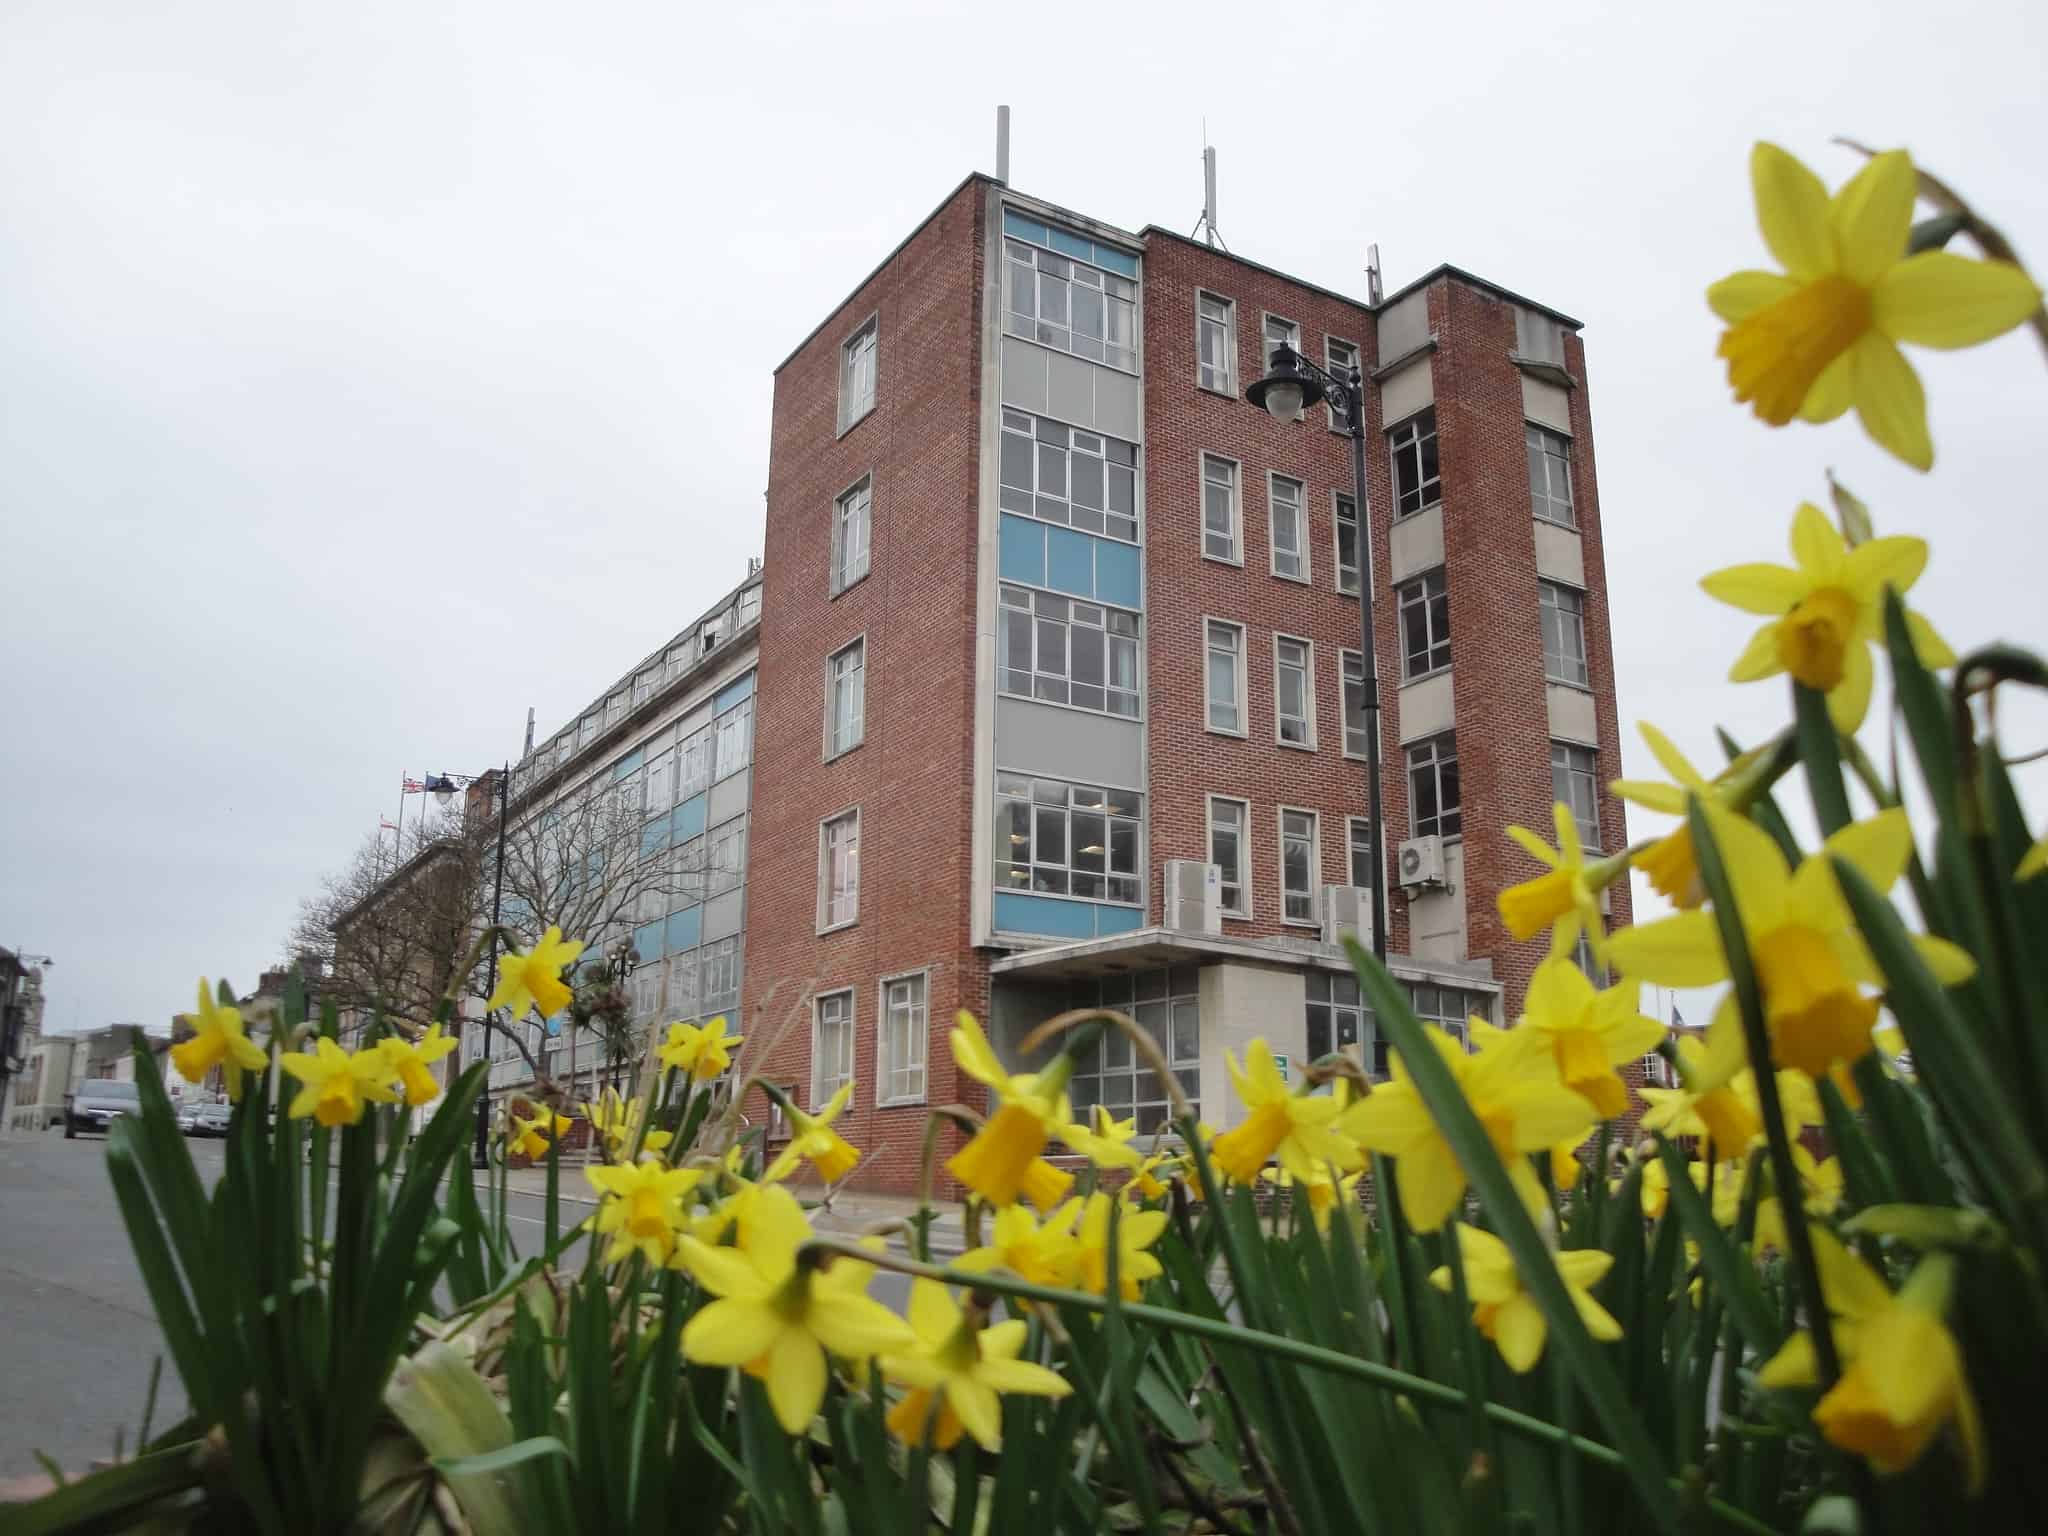 Daffodils outside County Hall in Newport by Simon Haytack